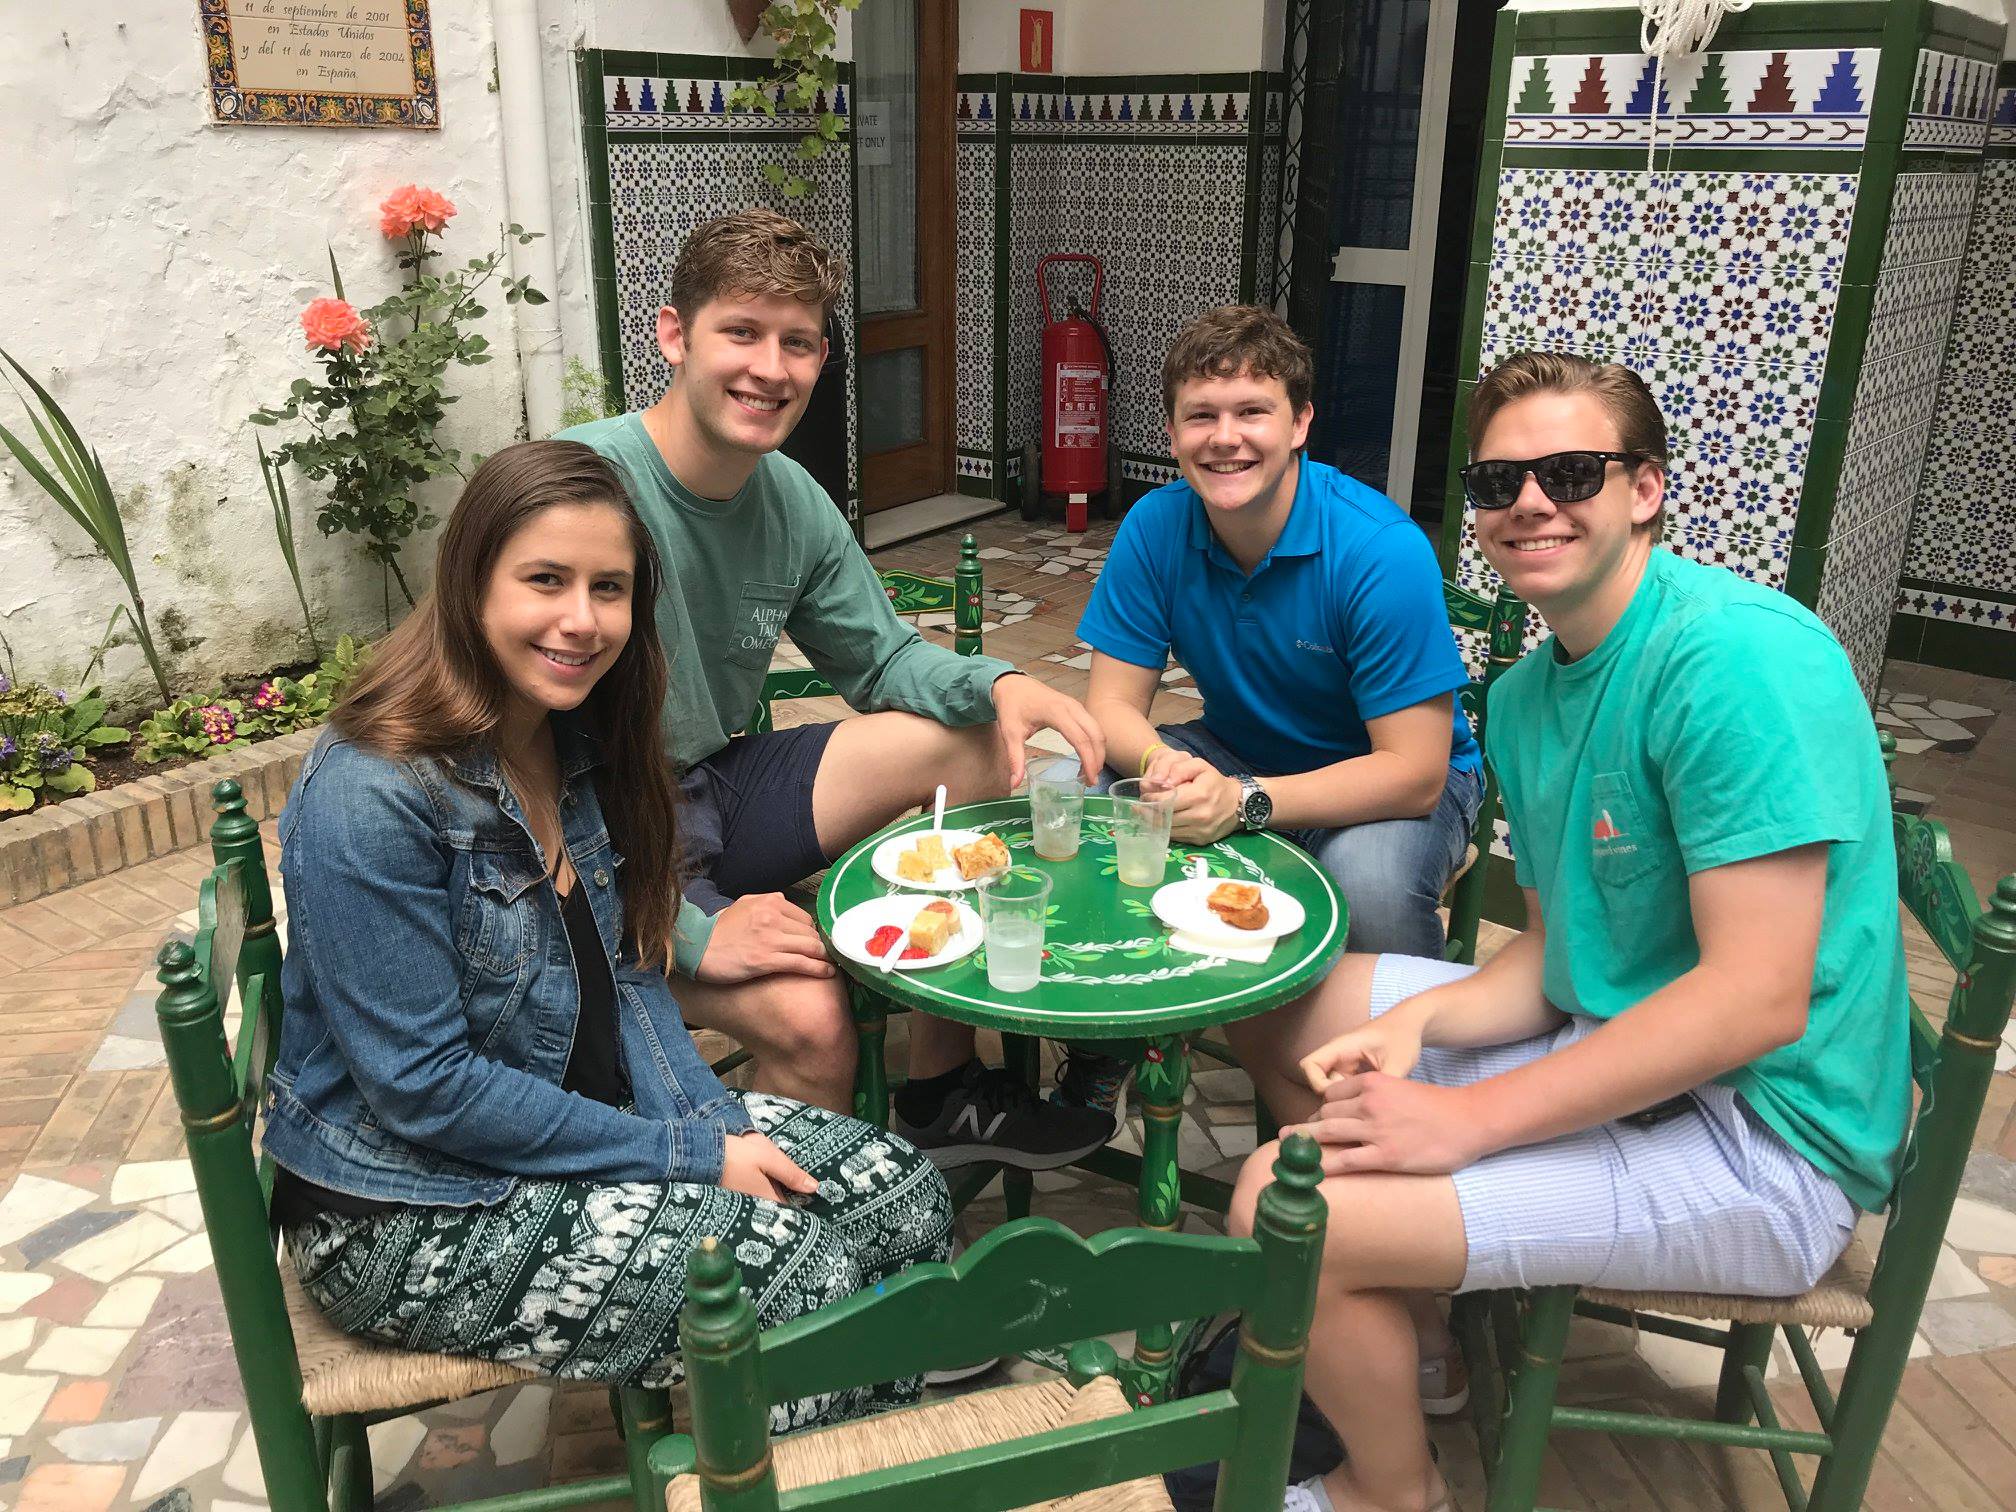 Alandis students are having a snack with local students in Seville.